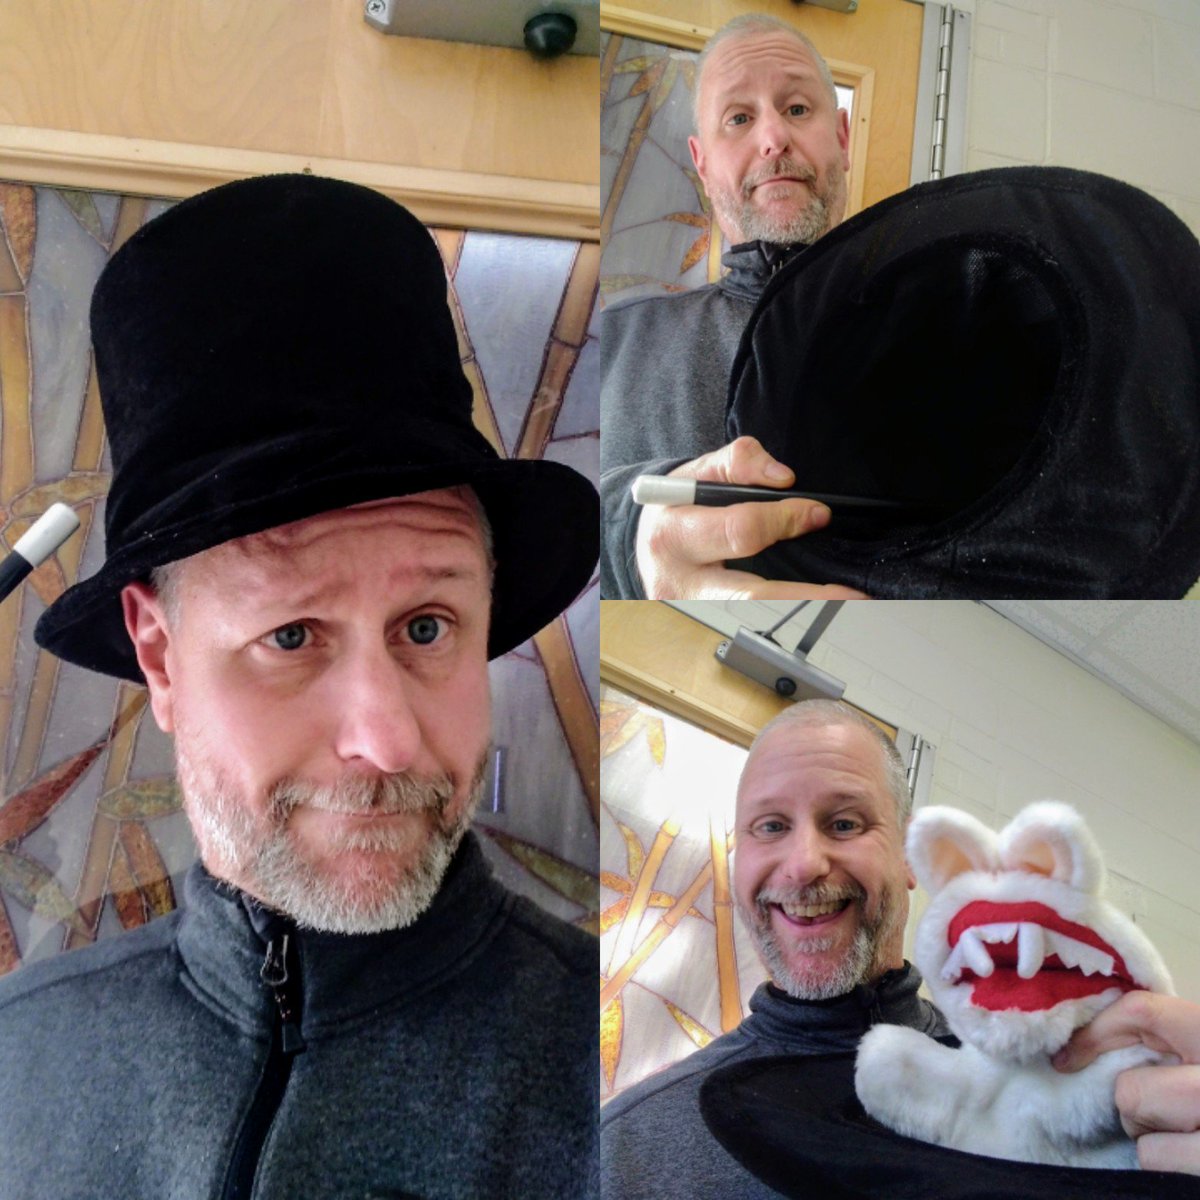 Day 18 TALL BLACK FELT HAT
Lincoln-Frosty-Scrooge-Stove Pipe-Victorian-Dickensian- ChimneySweep-Caroler? But nobody guessed PopUpMagic till the Killer Rabbit of Caerbannog appered as if from nowhere! 😲🐰🎩🐇😲 #WeAllWearManyHats #BobGoliath A different hat everyday, ad nauseum